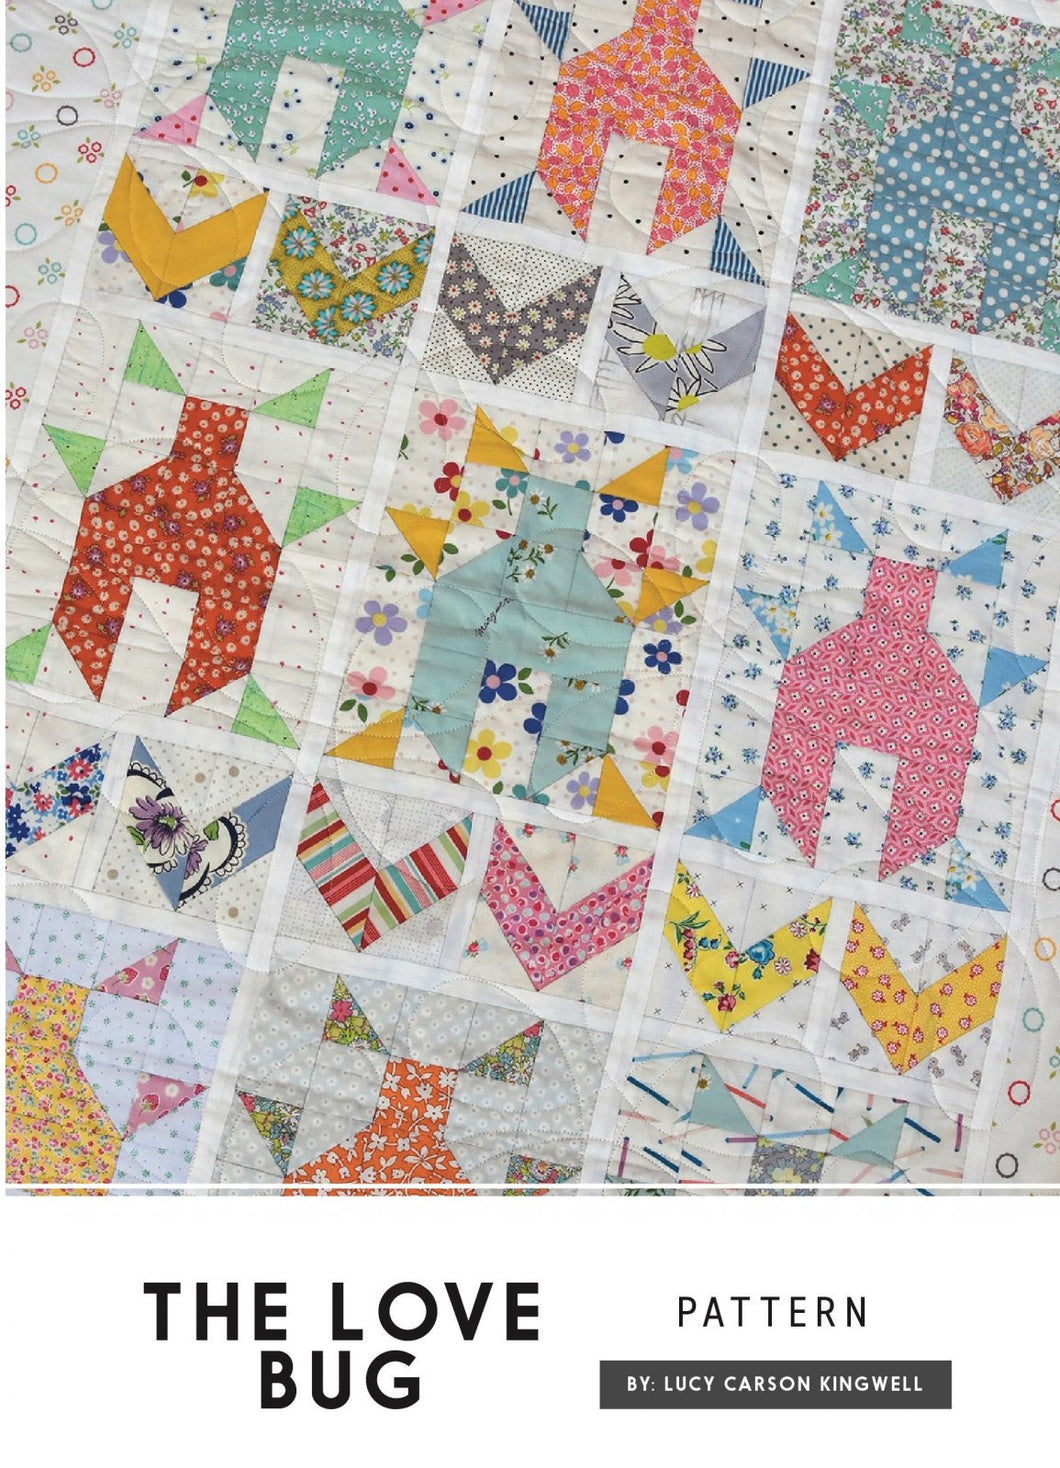 The Love Bug Pattern by Lucy Carson Kingwell from Jen Kingwell Design